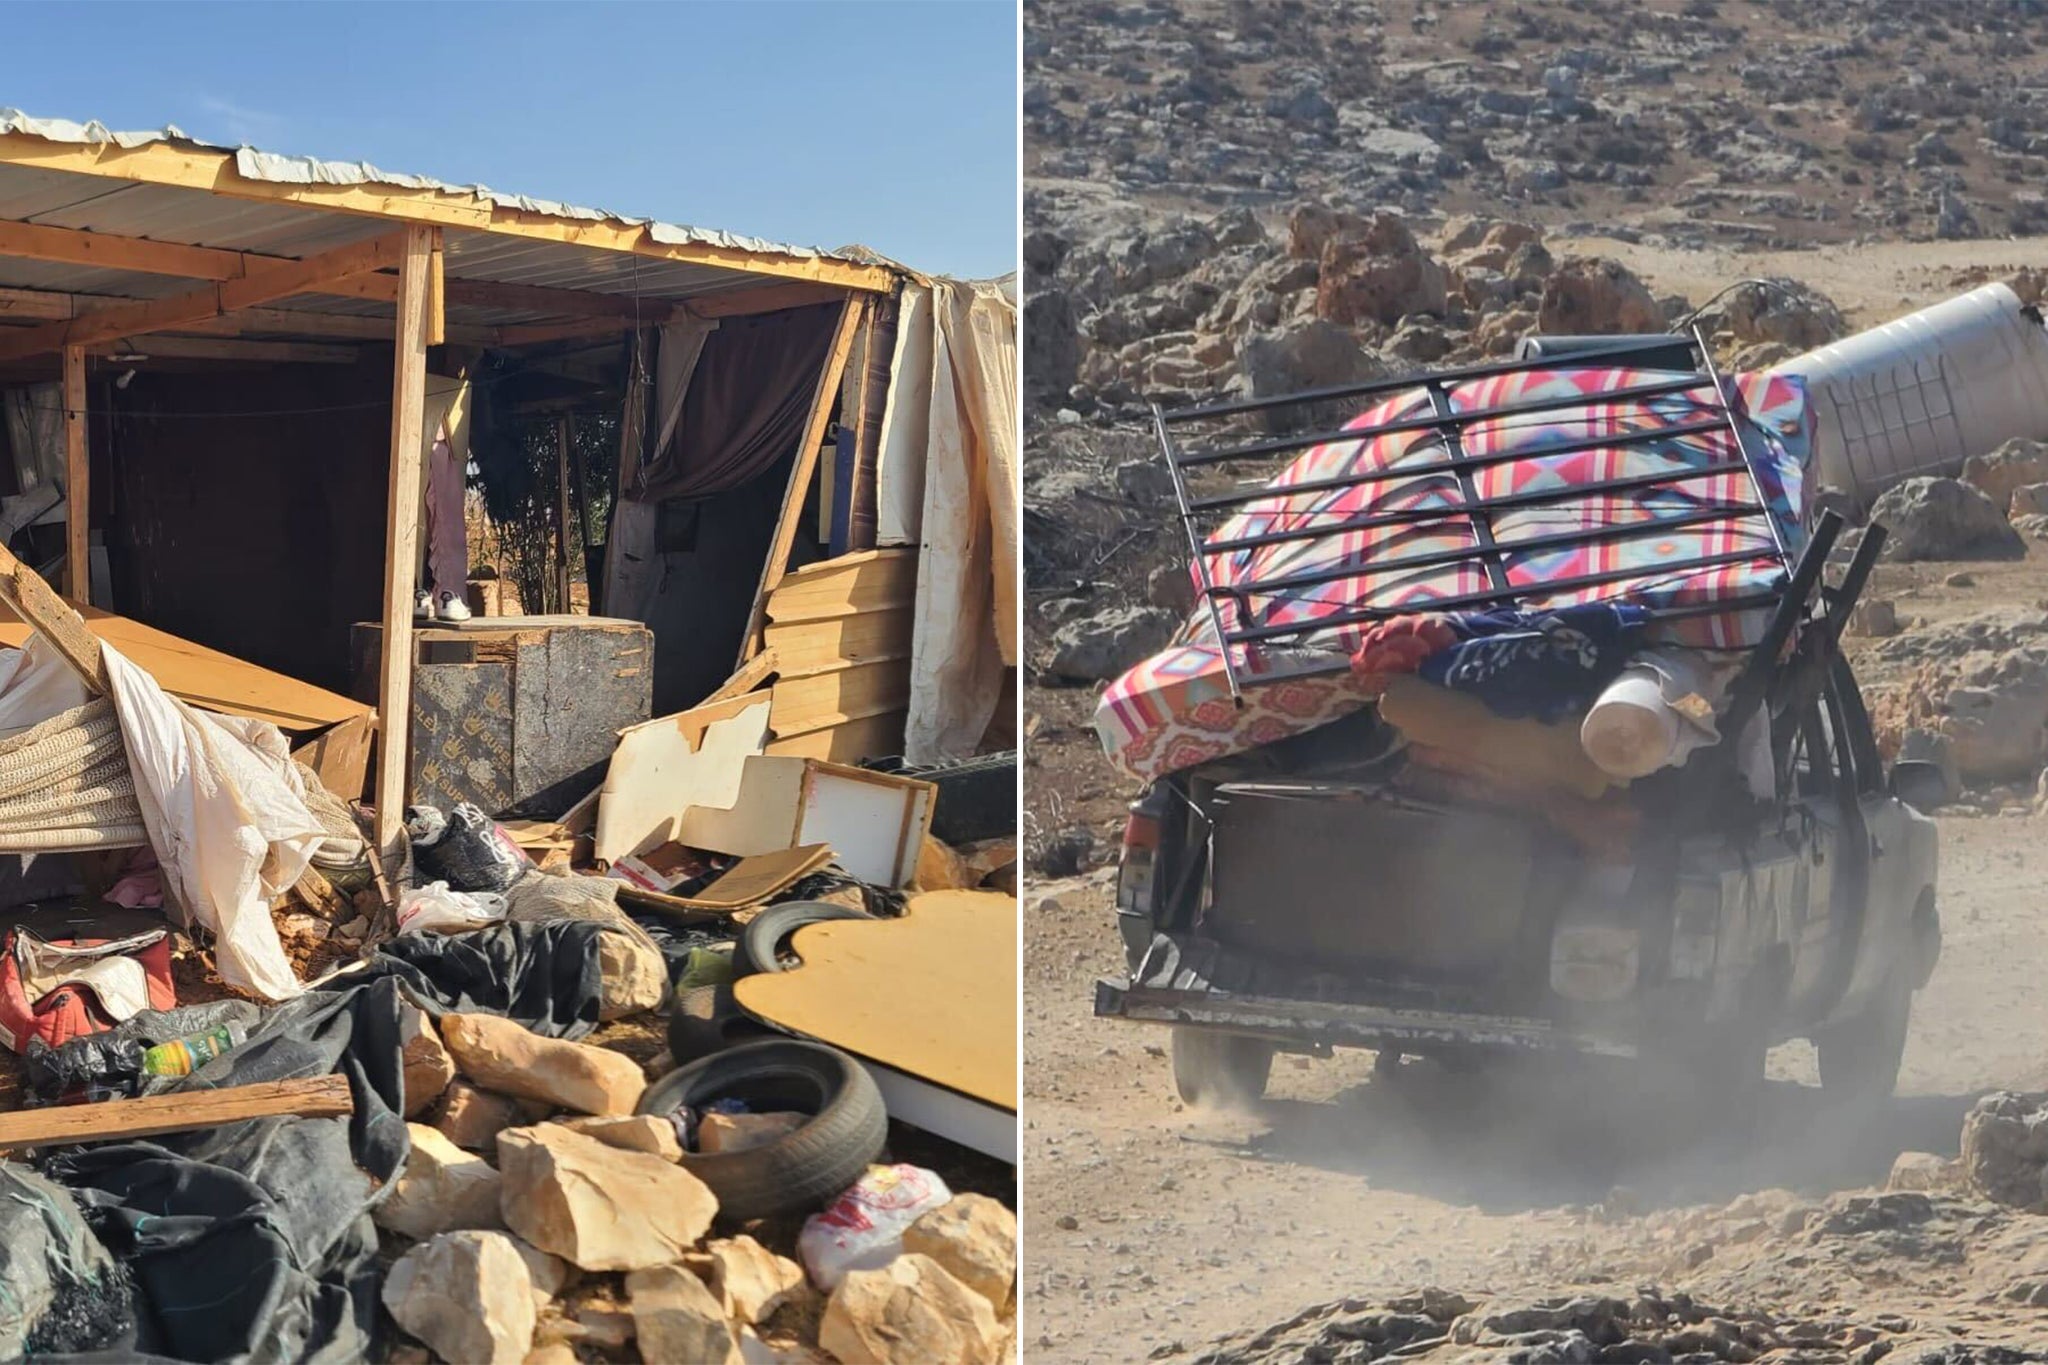 Bedouin communities have had their homes wrecked and been forced to leave their land in the West Bank